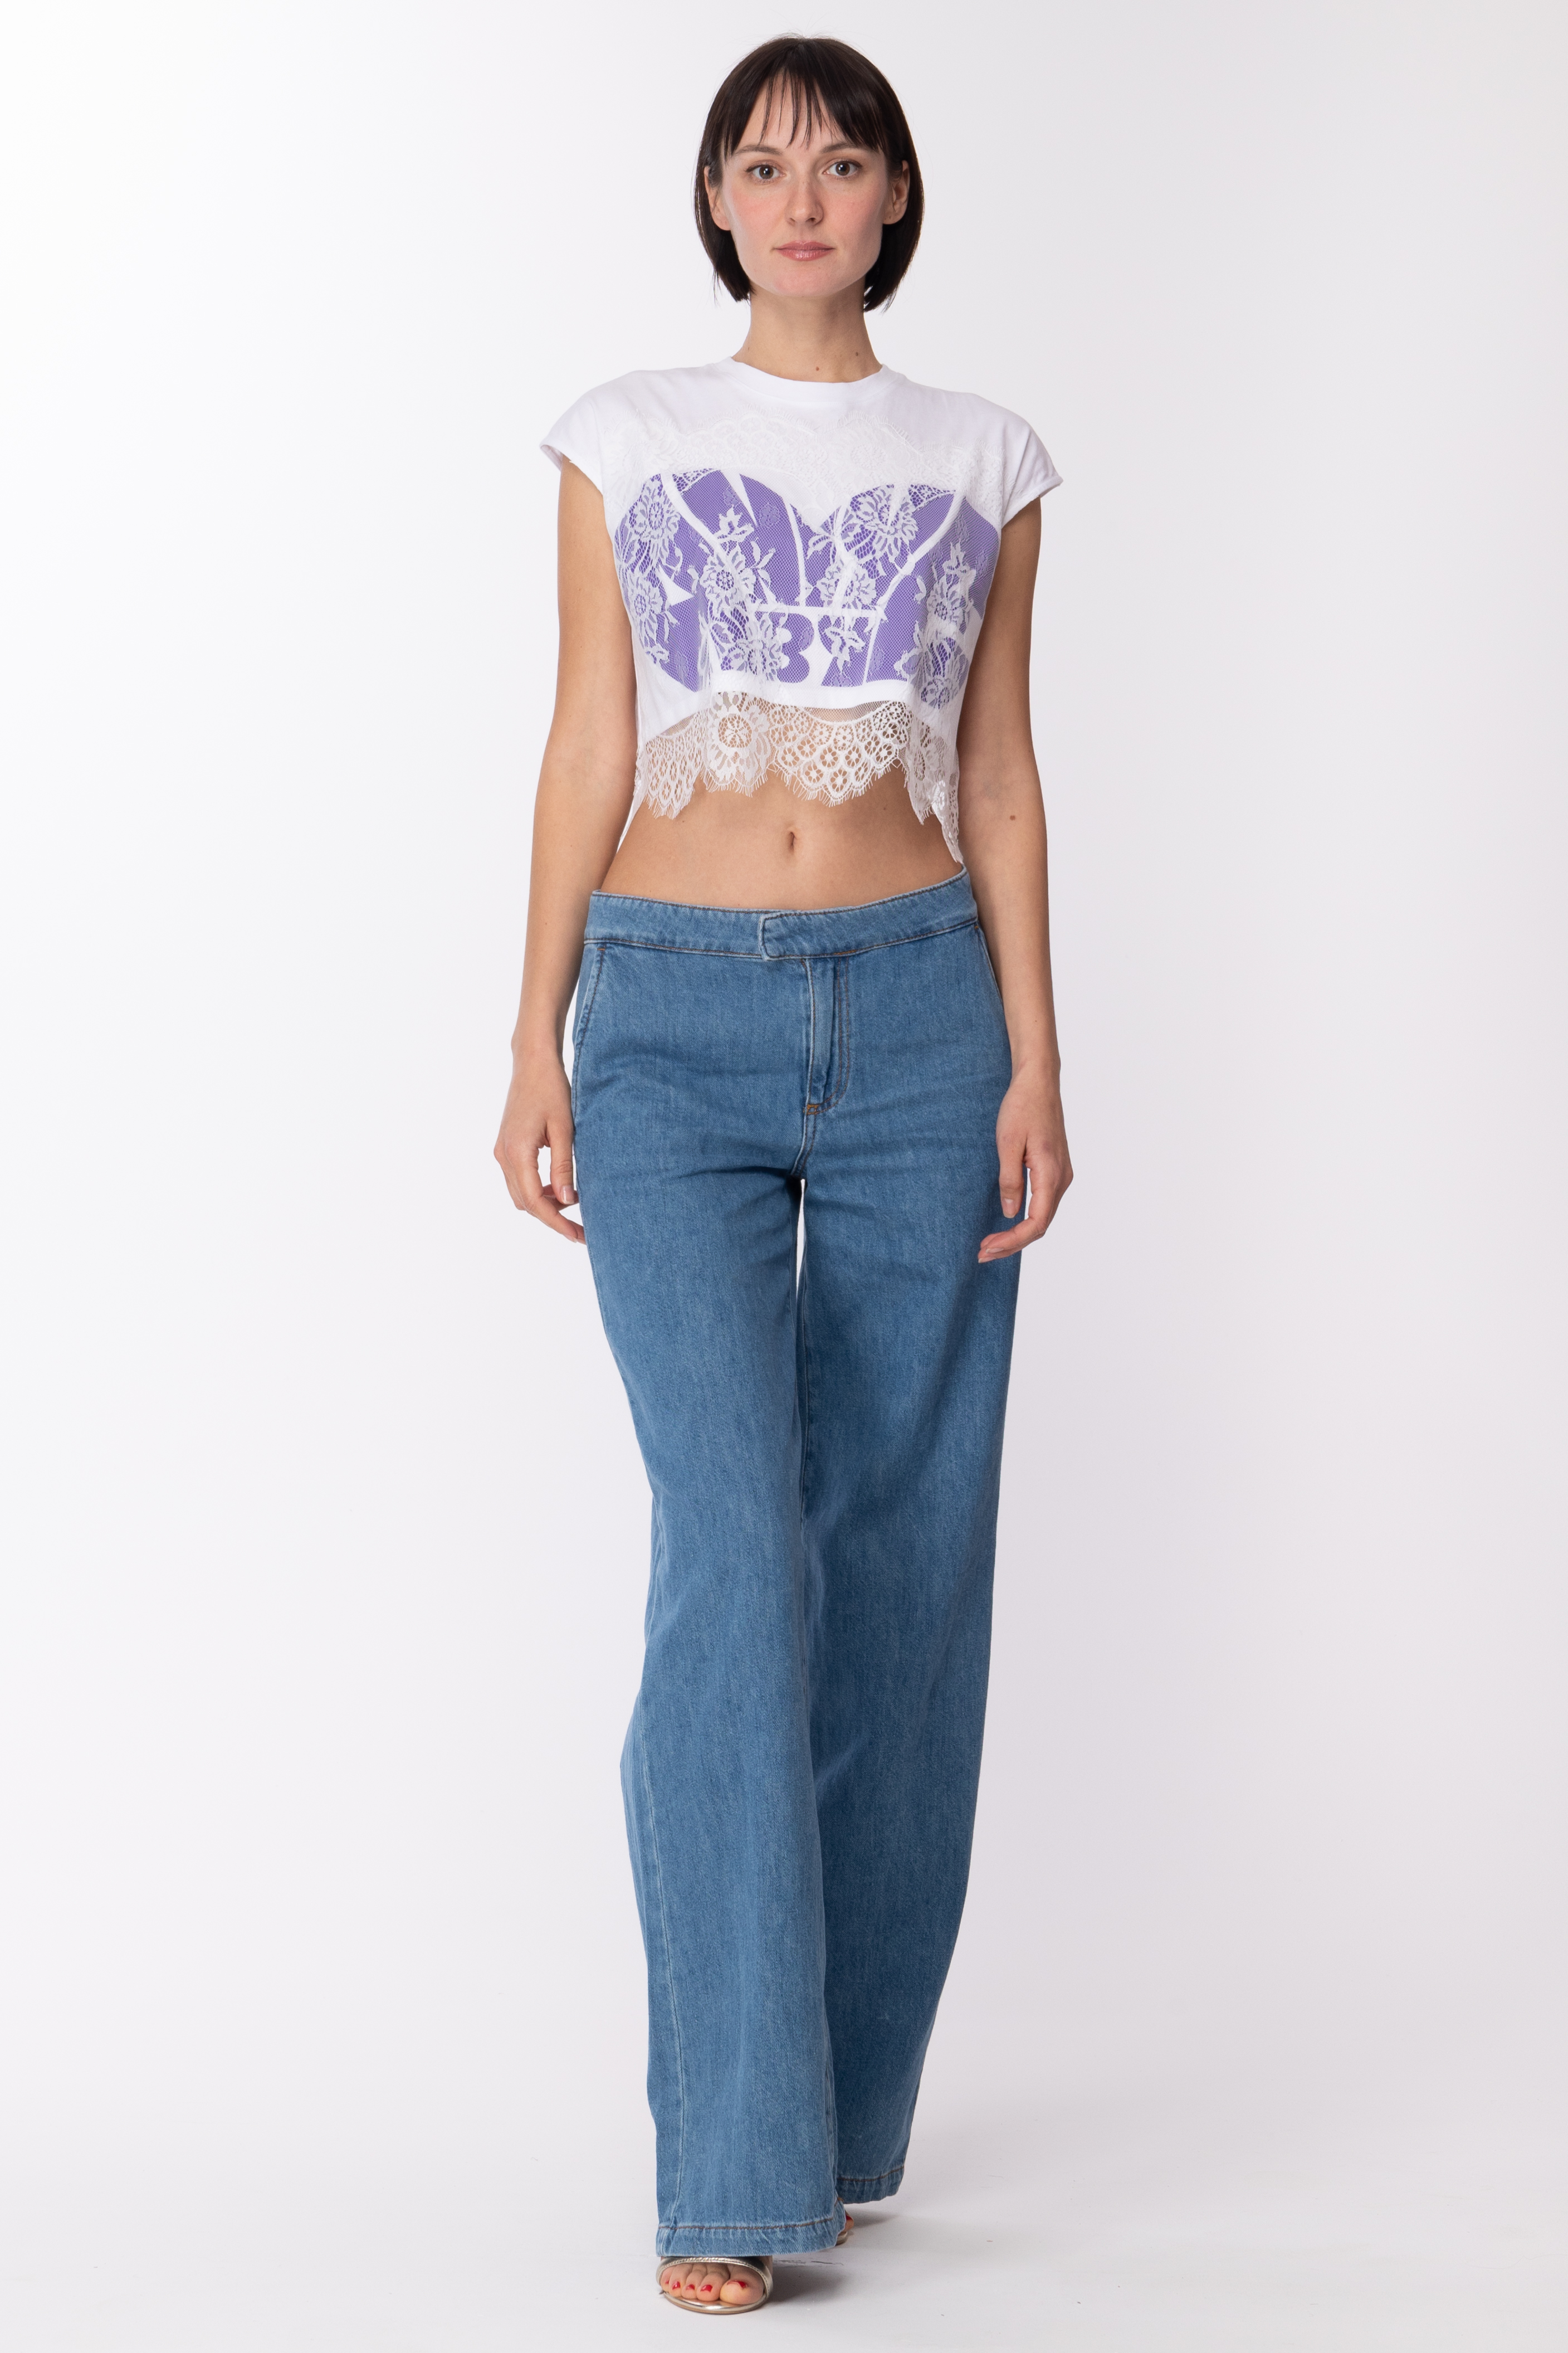 Preview: Aniye By Nyta crop top with print and lace WHITE PURPLE